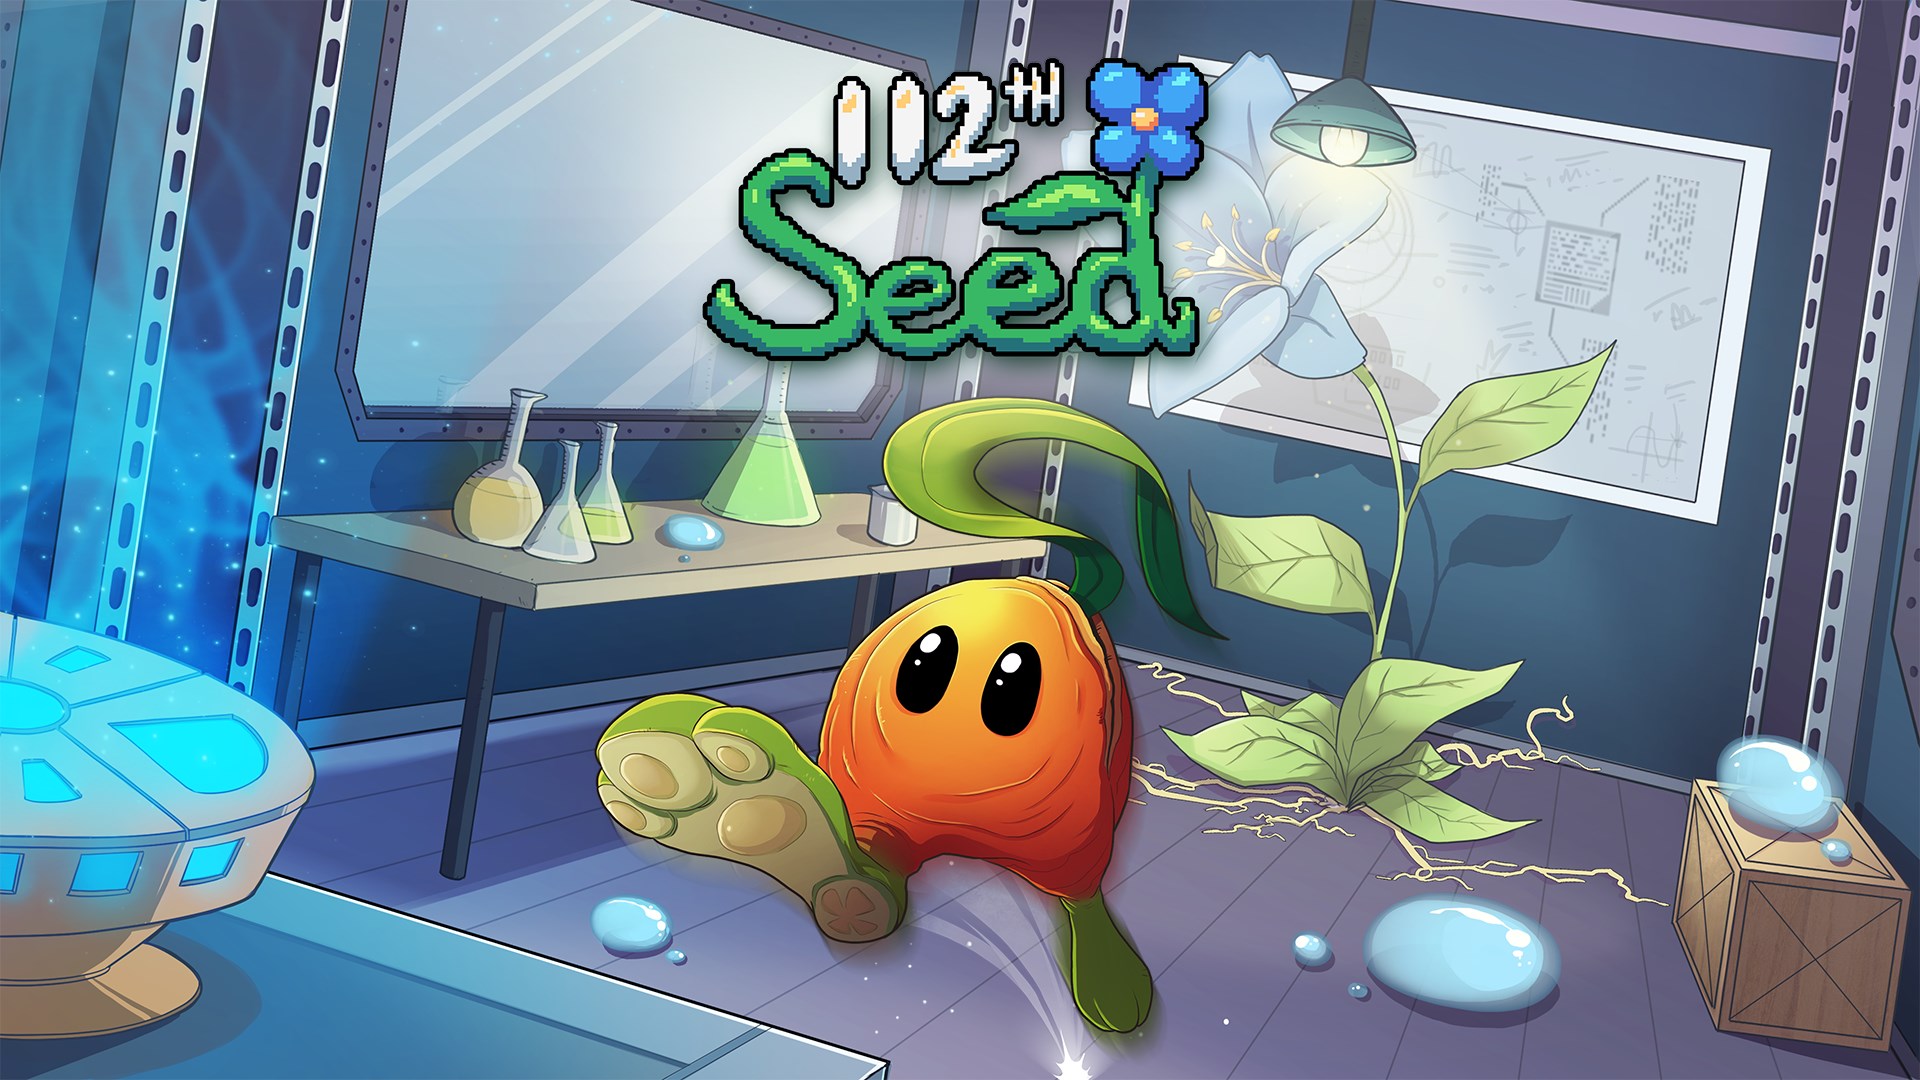 Video For 112th Seed Is Now Available For Xbox One